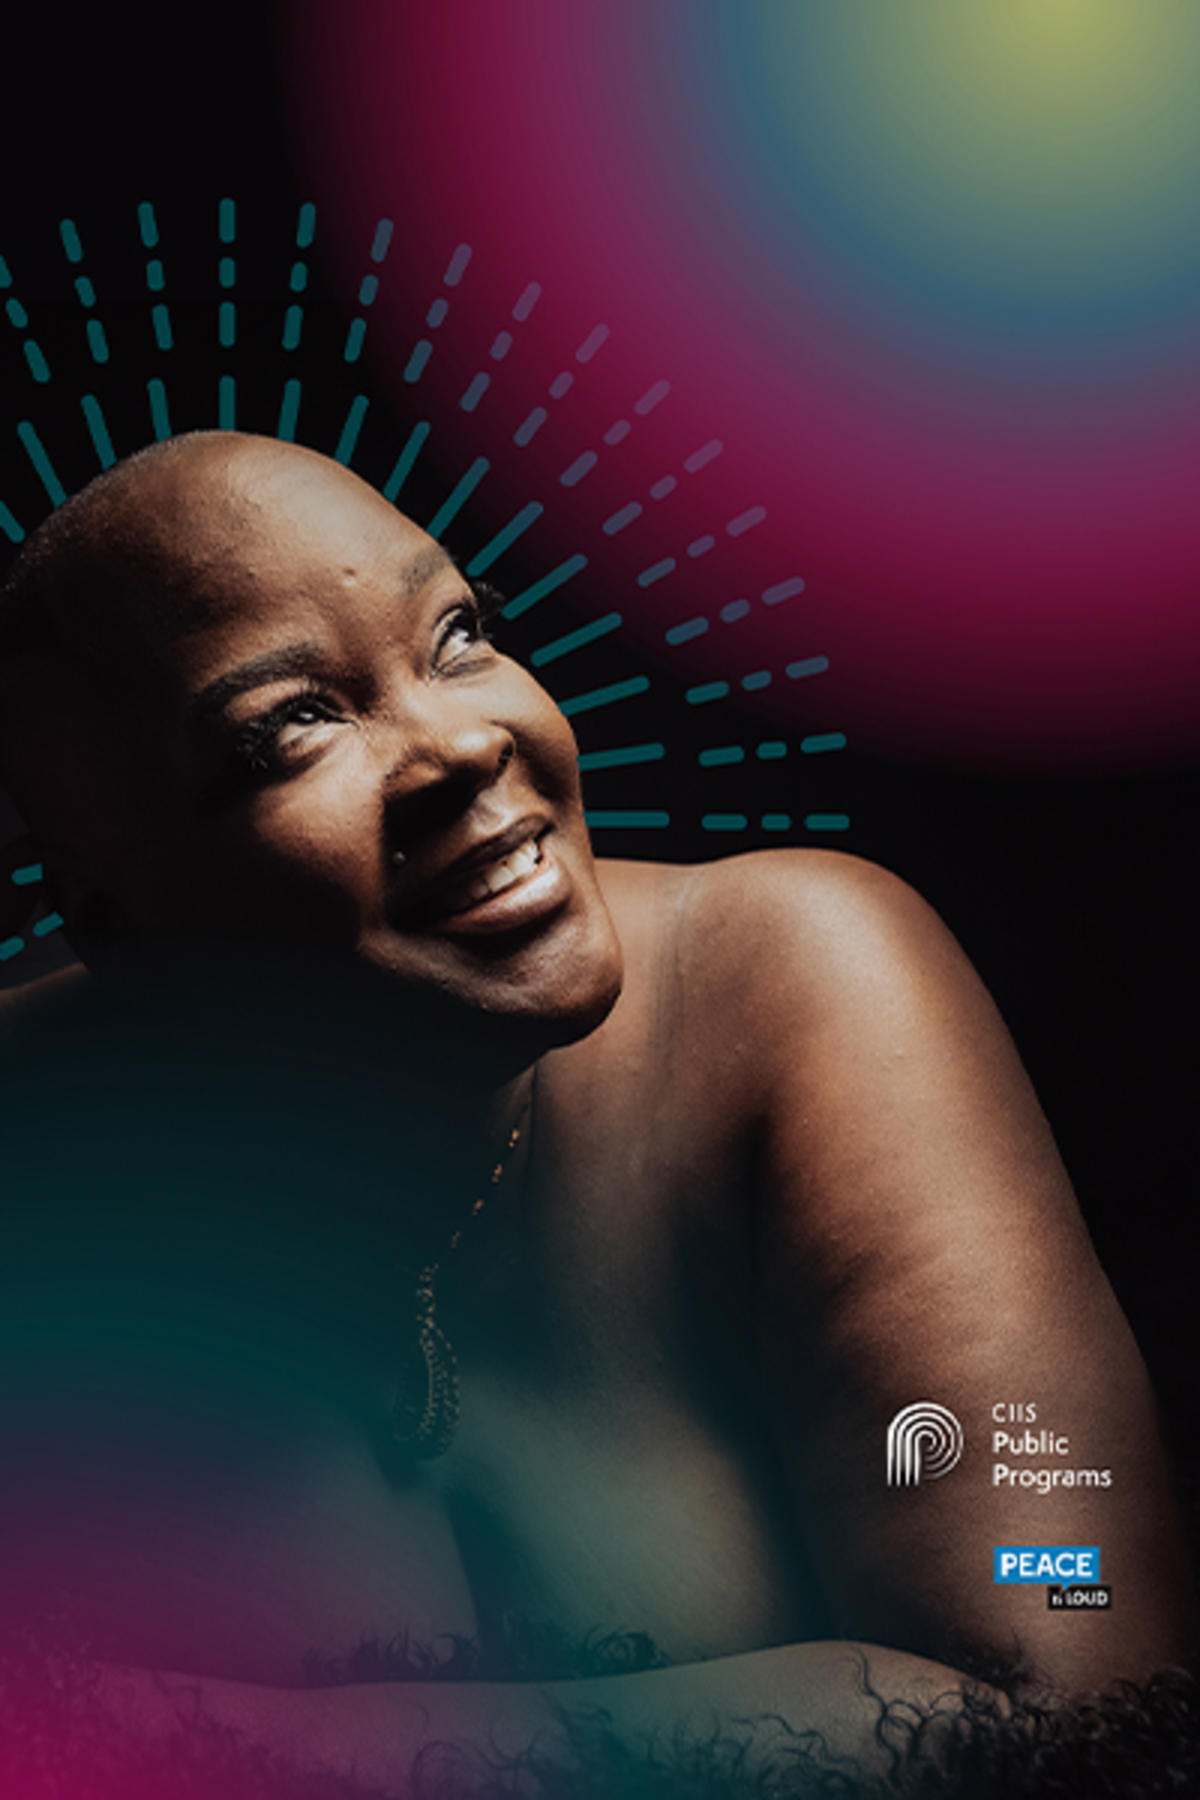 Sonya Renee Taylor in a color portrait and is looking to the right and smiling. Sonya is resting on a dark, fuzzy carpet and an illustration of a halo sits above her head as well as gradient of colors at the top right and bottom left corners.